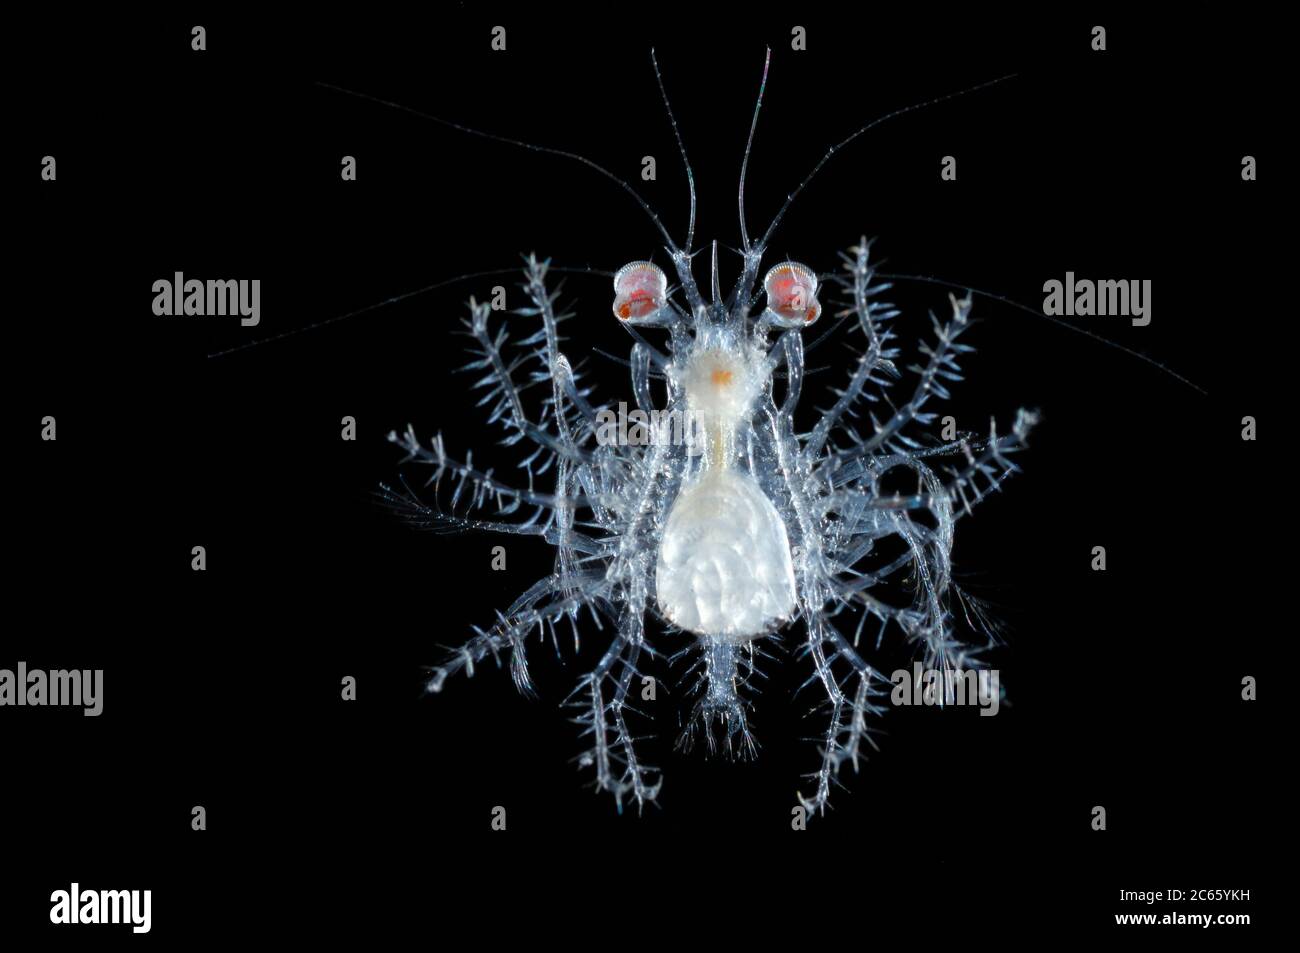 During their development from egg to adult crustaceans pass through various larval stages. This pelagic developmental stage of a crab is called Megalopa. Megalopa-Larve Stock Photo